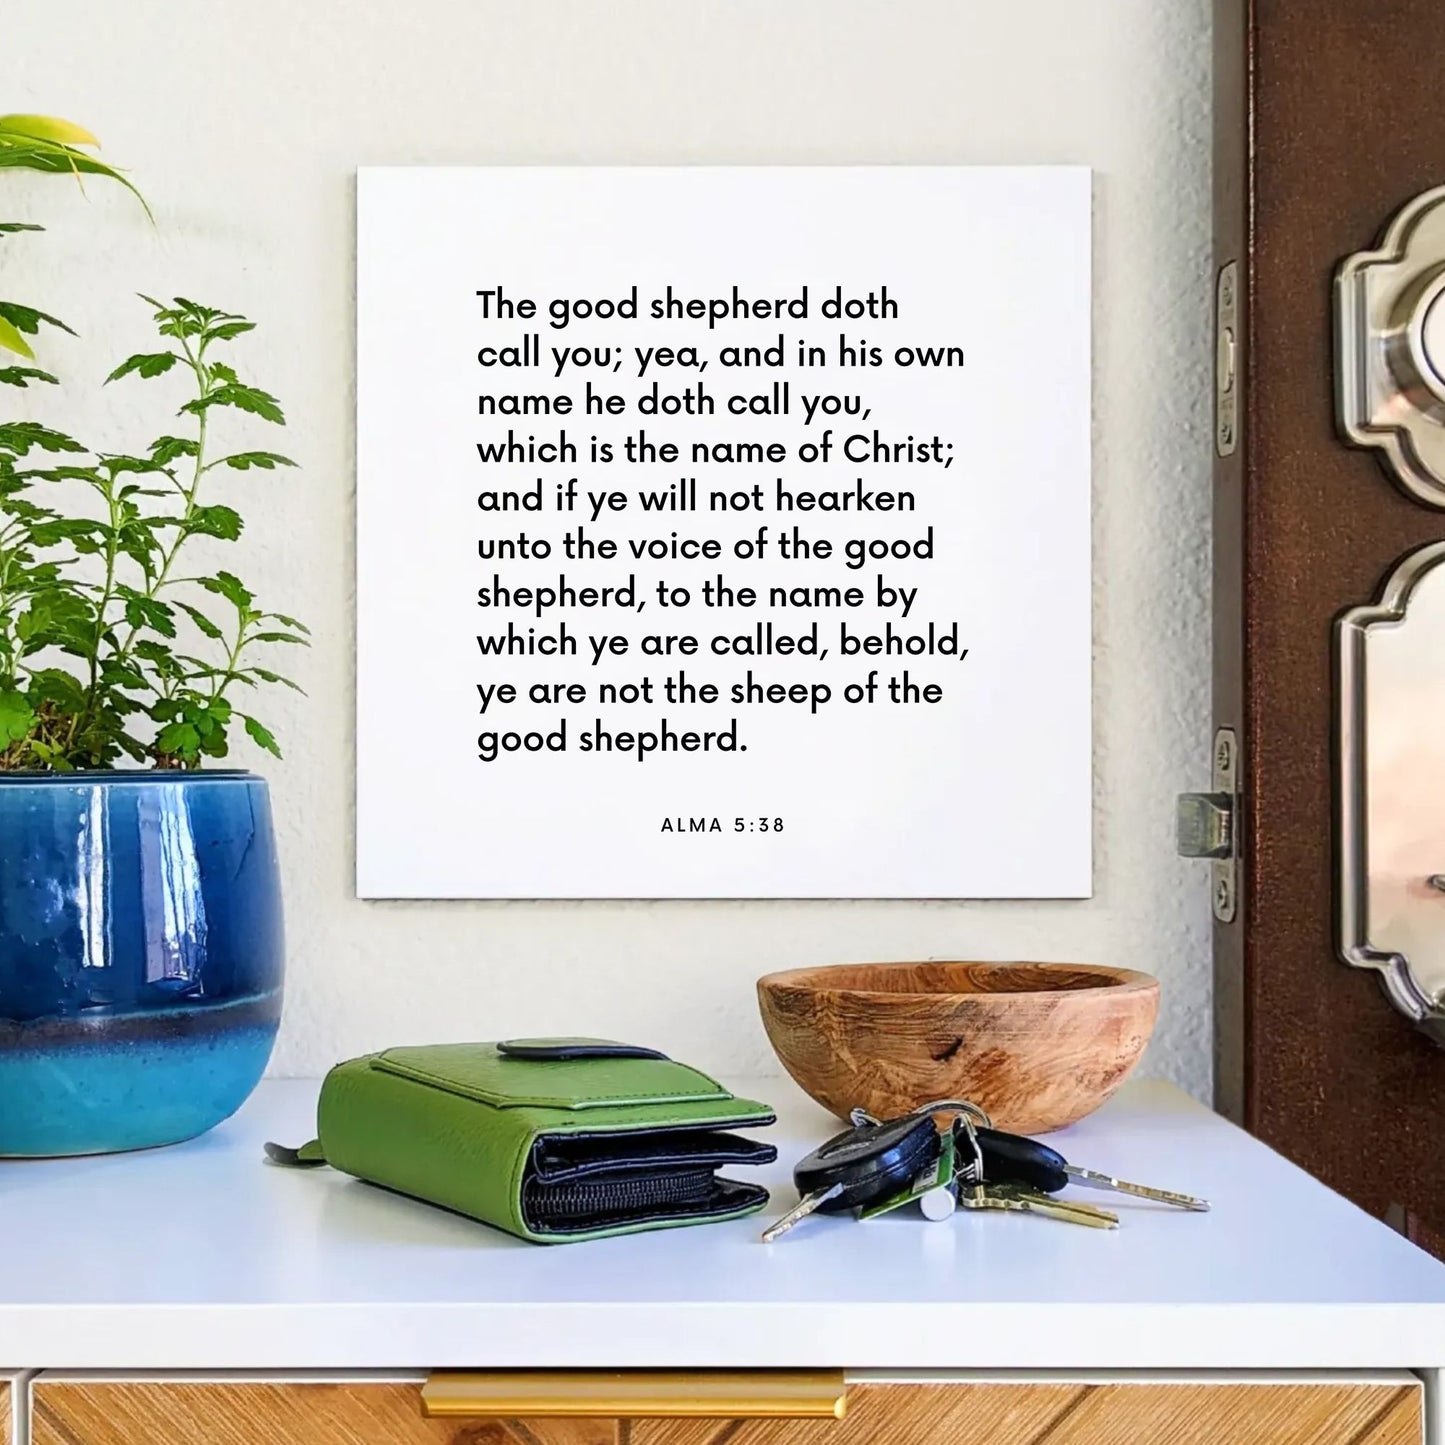 Entryway mouting of the scripture tile for Alma 5:38 - "The good shepherd doth call you"